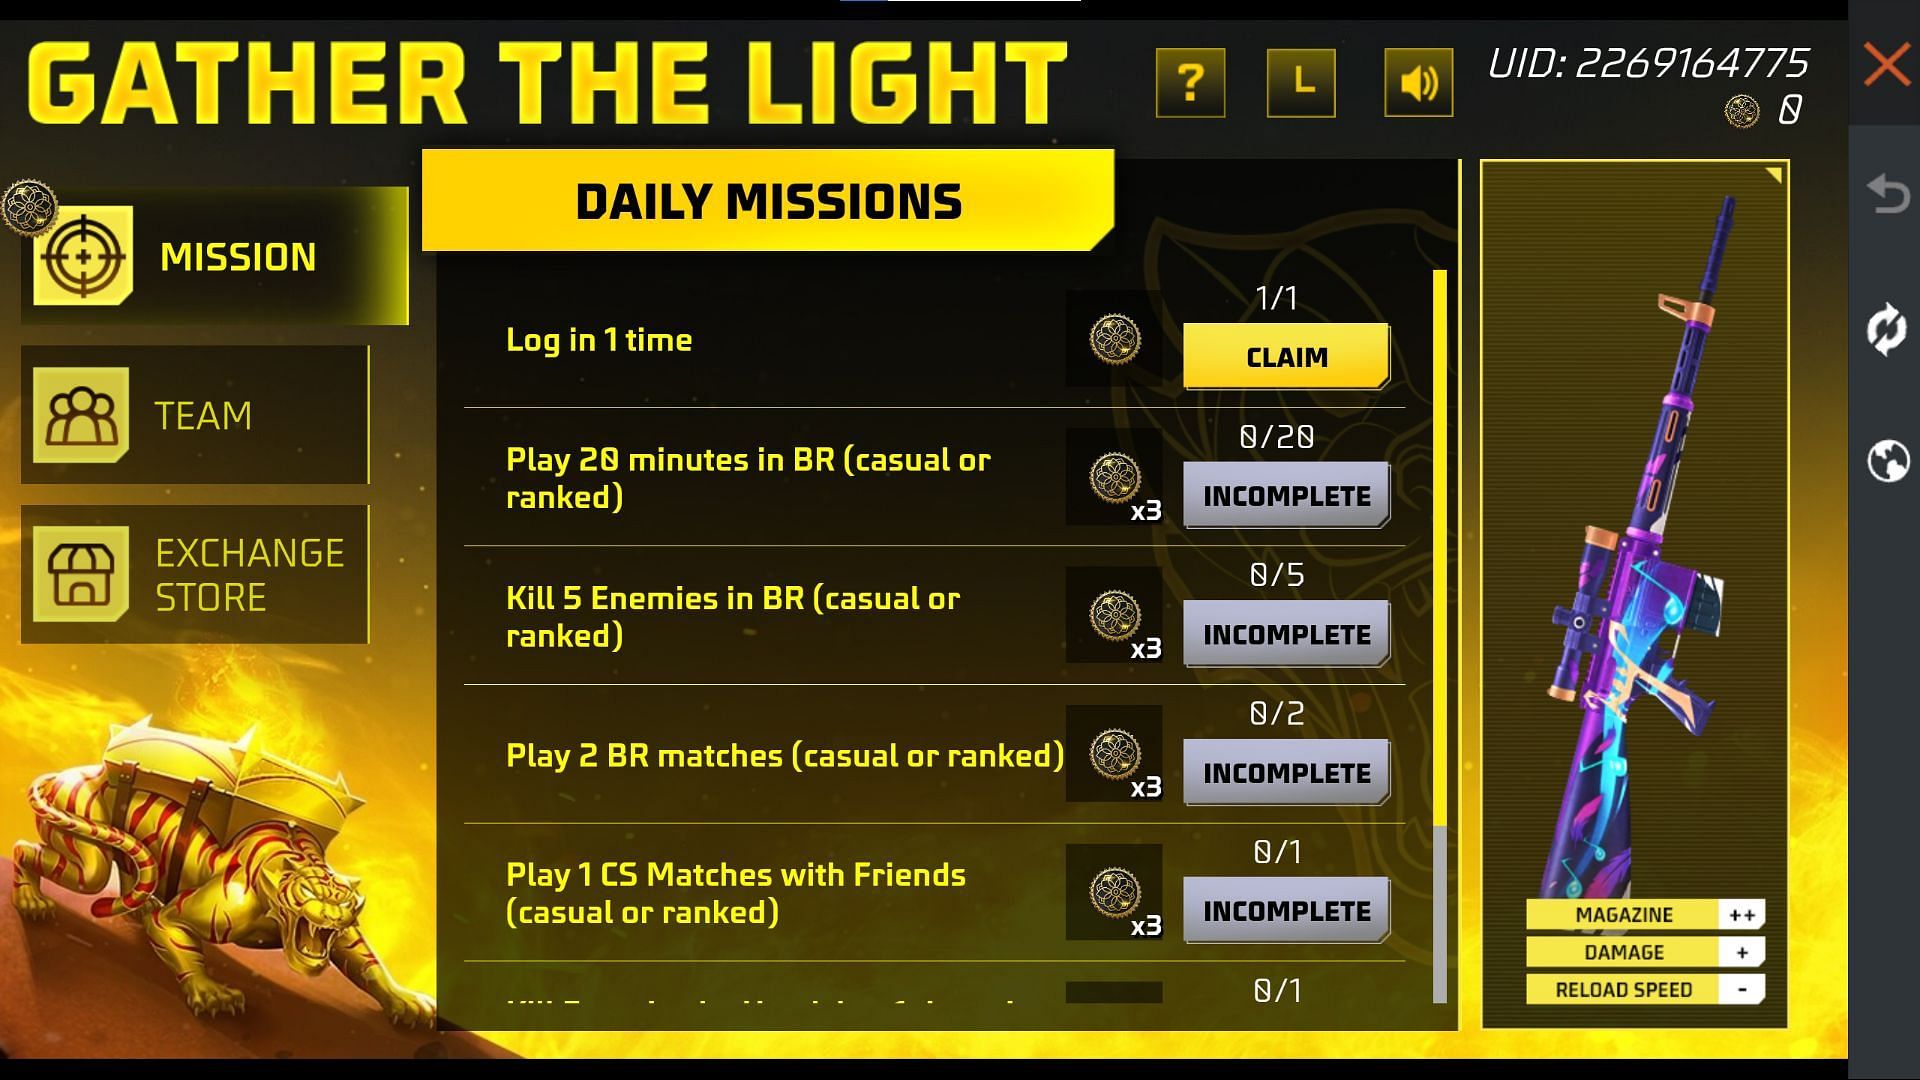 Daily Missions is one of the two methods to get Light tokens in Free Fire MAX (Image via Garena)